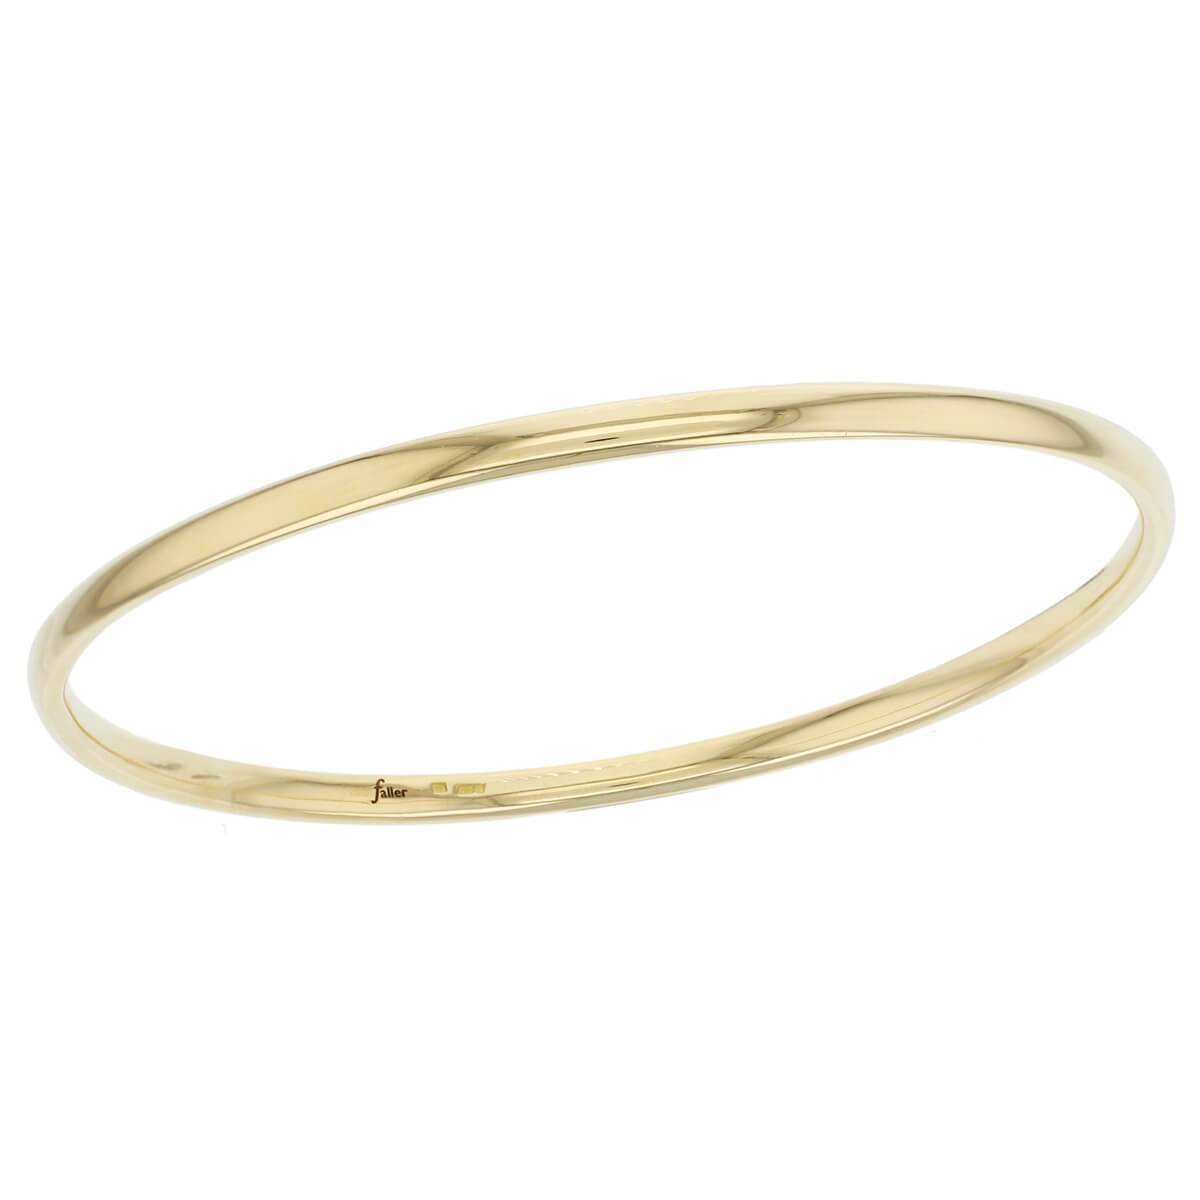 Solid 18ct Yellow Gold Round Bangle - Faller